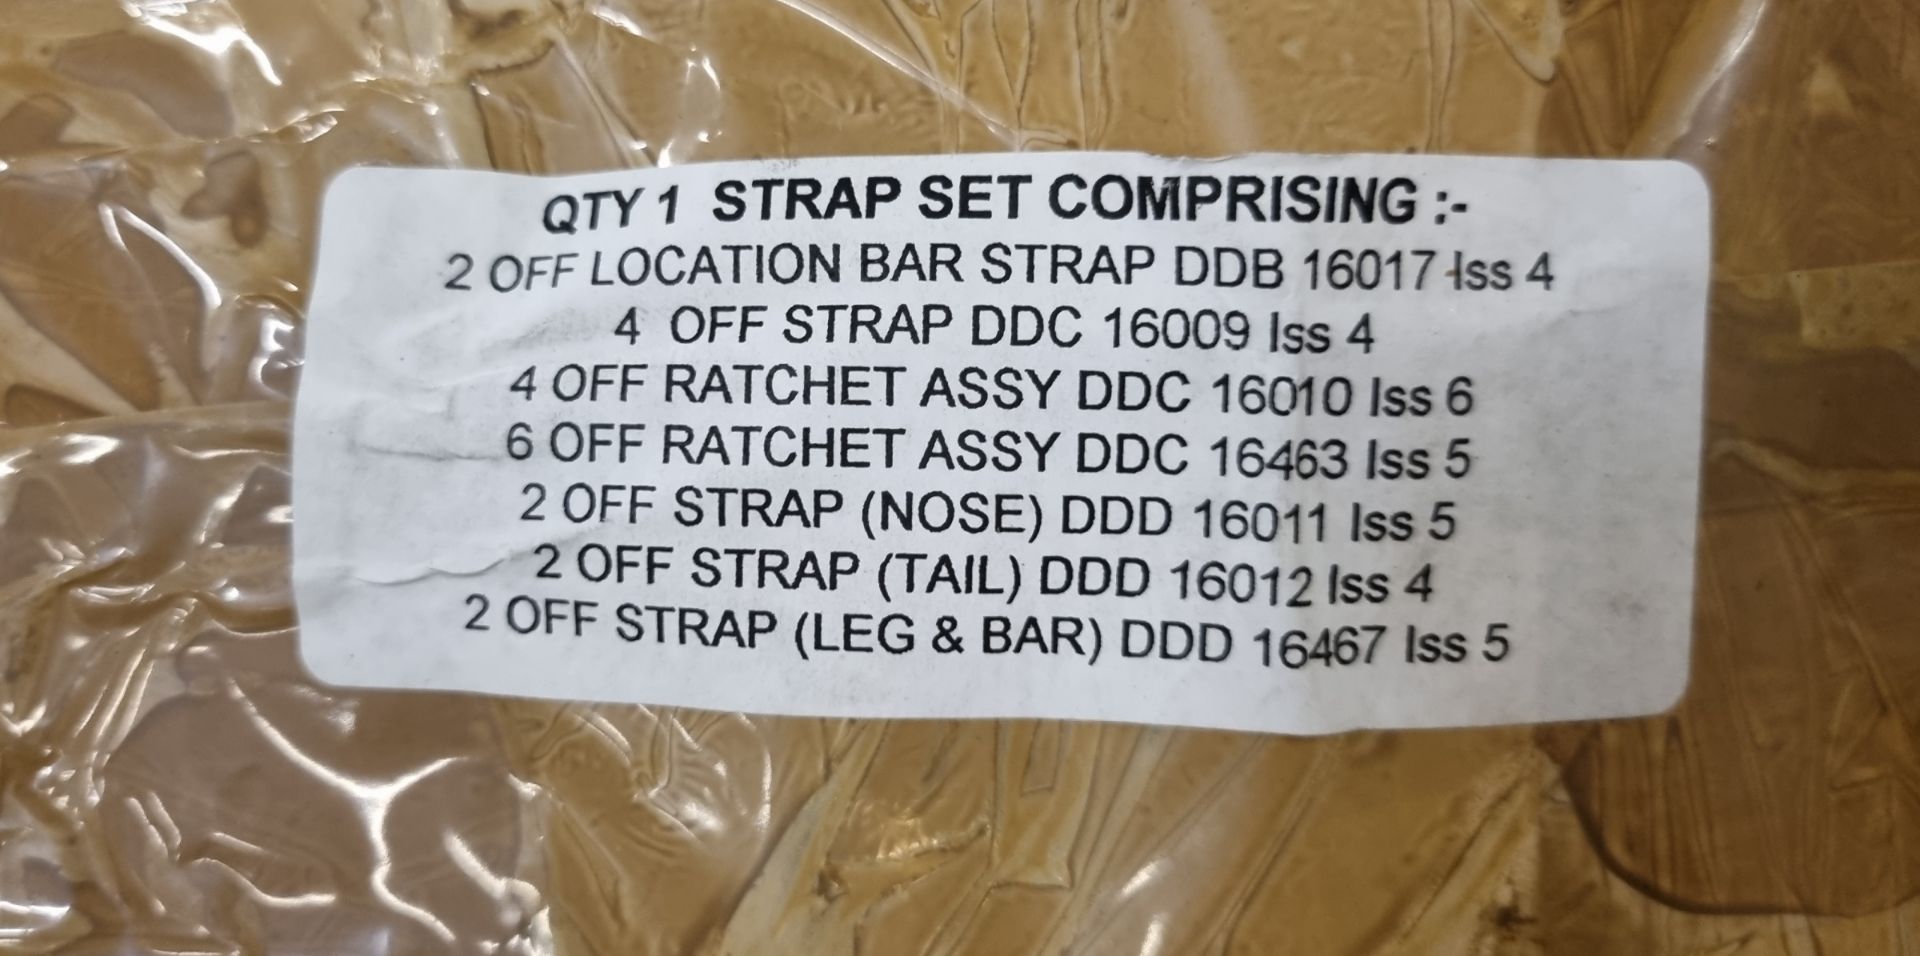 4x 22 piece ratchet and strap sets - Image 9 of 9